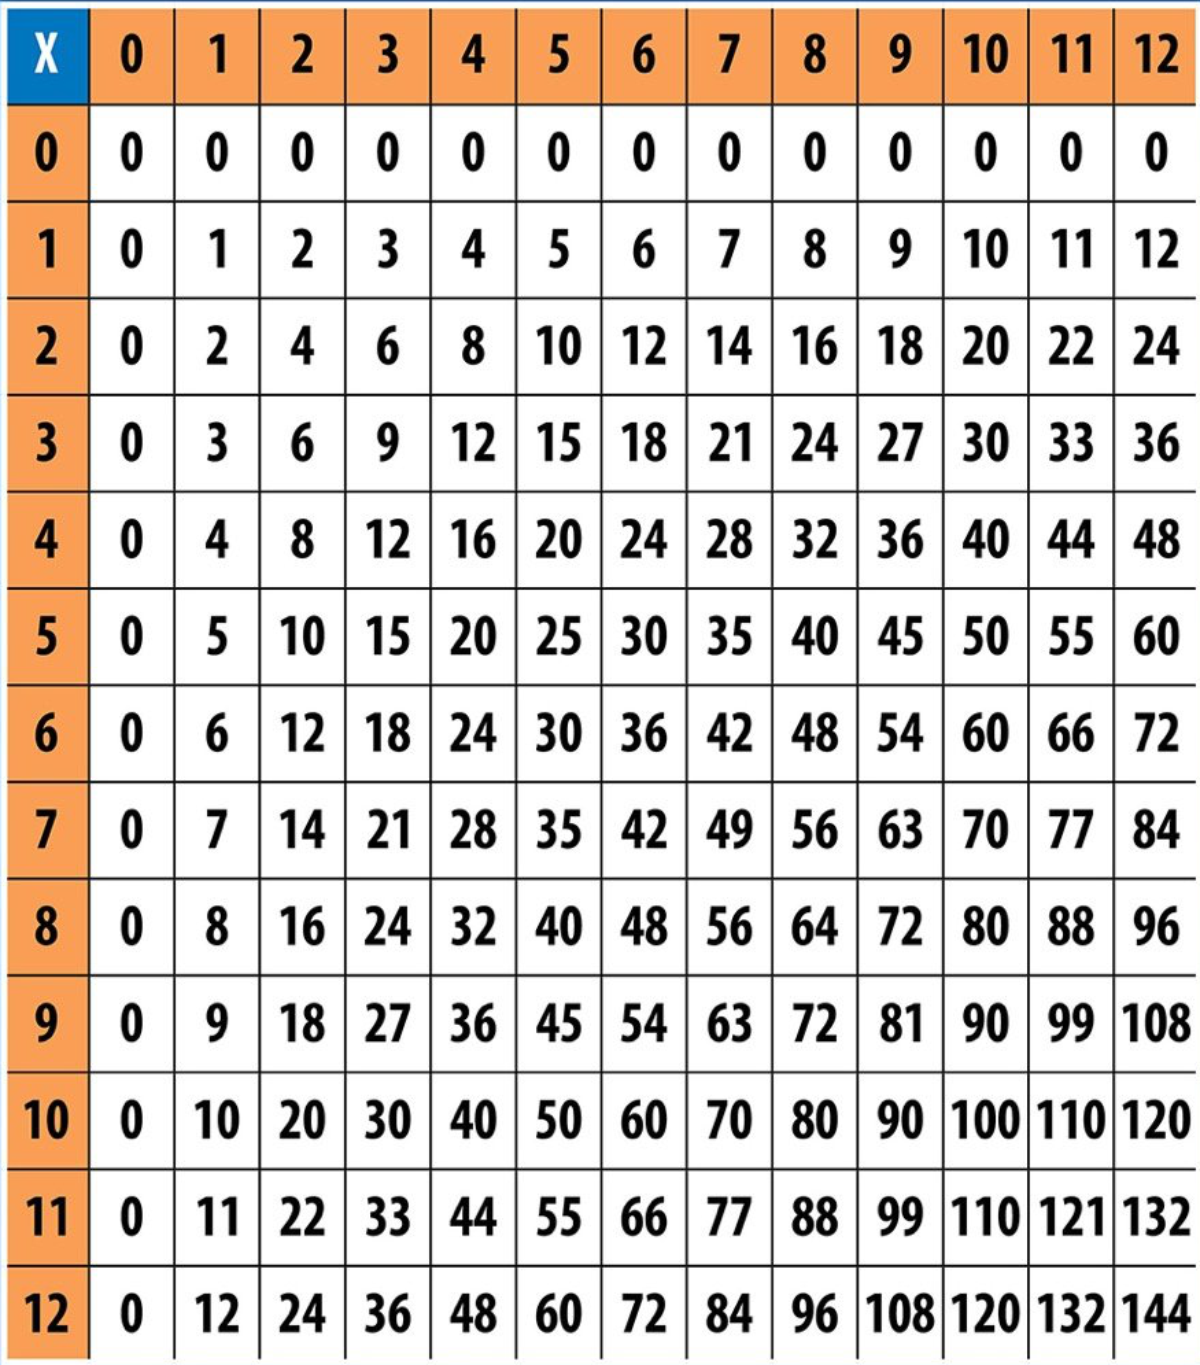 30 by 30 multiplication chart printable - Focus